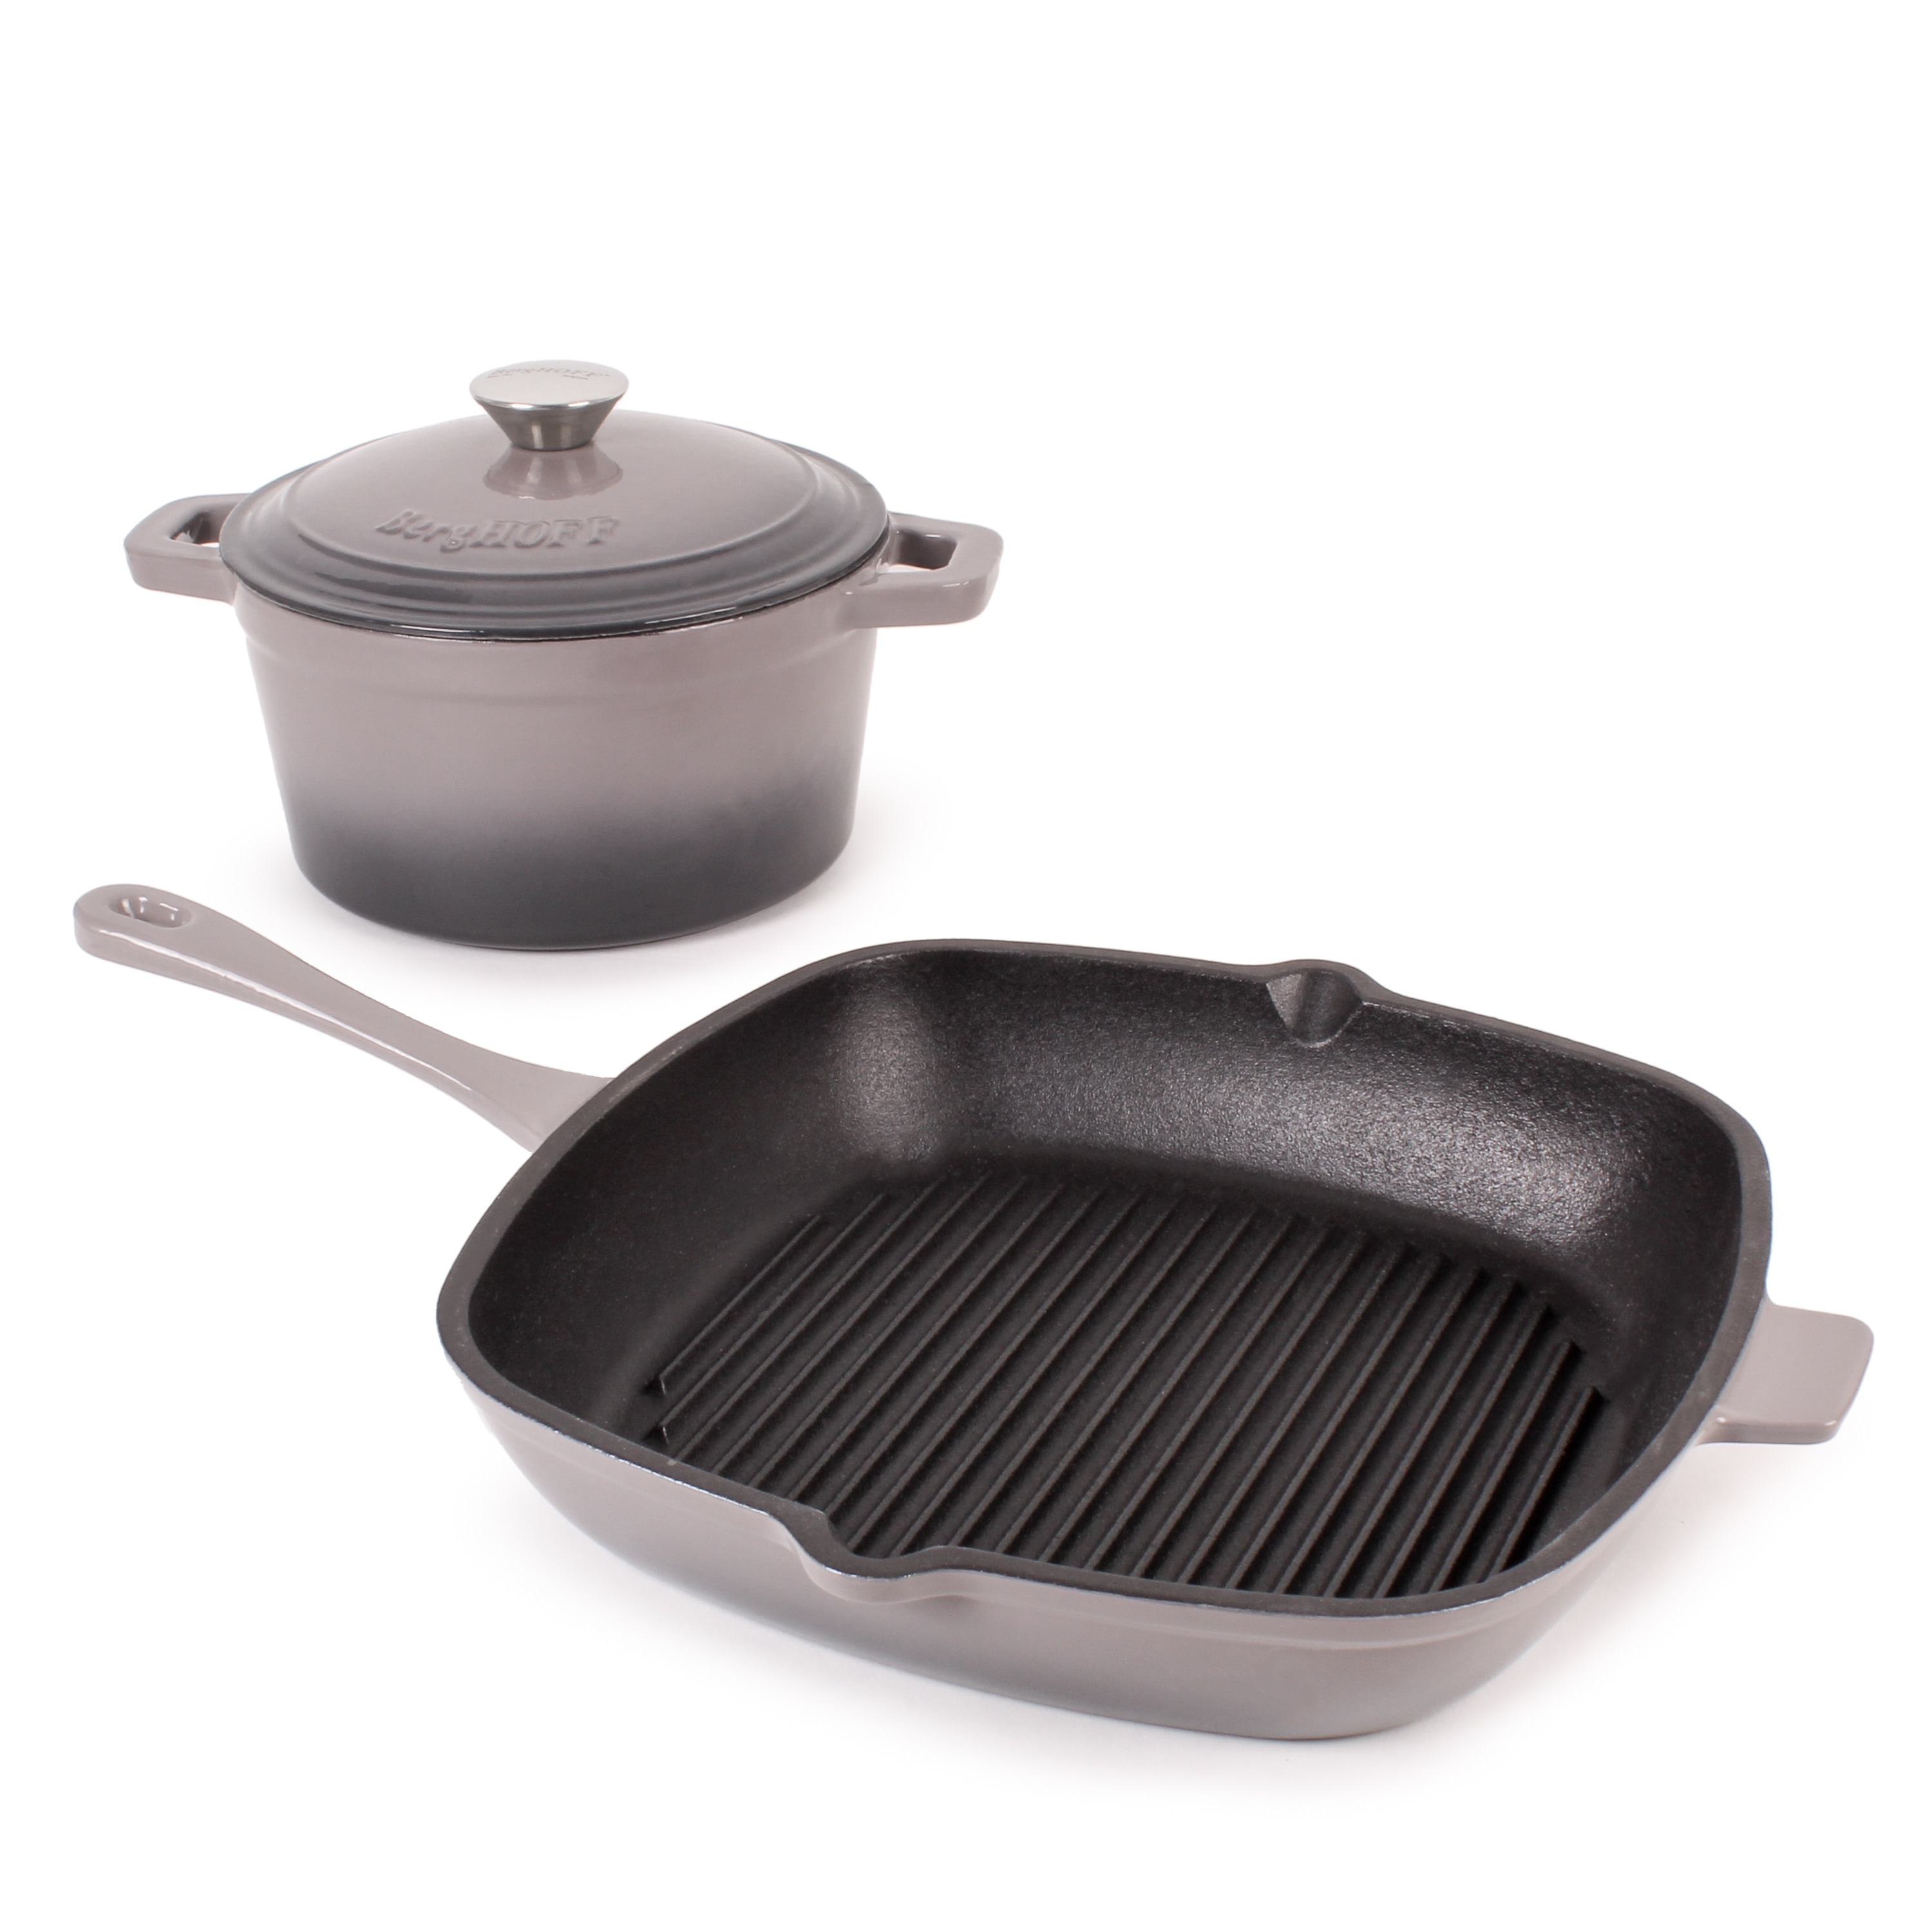 BergHOFF Neo 3Pc Cast Iron Cookware Set, 3qt. Covered Dutch Oven & 10 Fry  Pan, Oyster